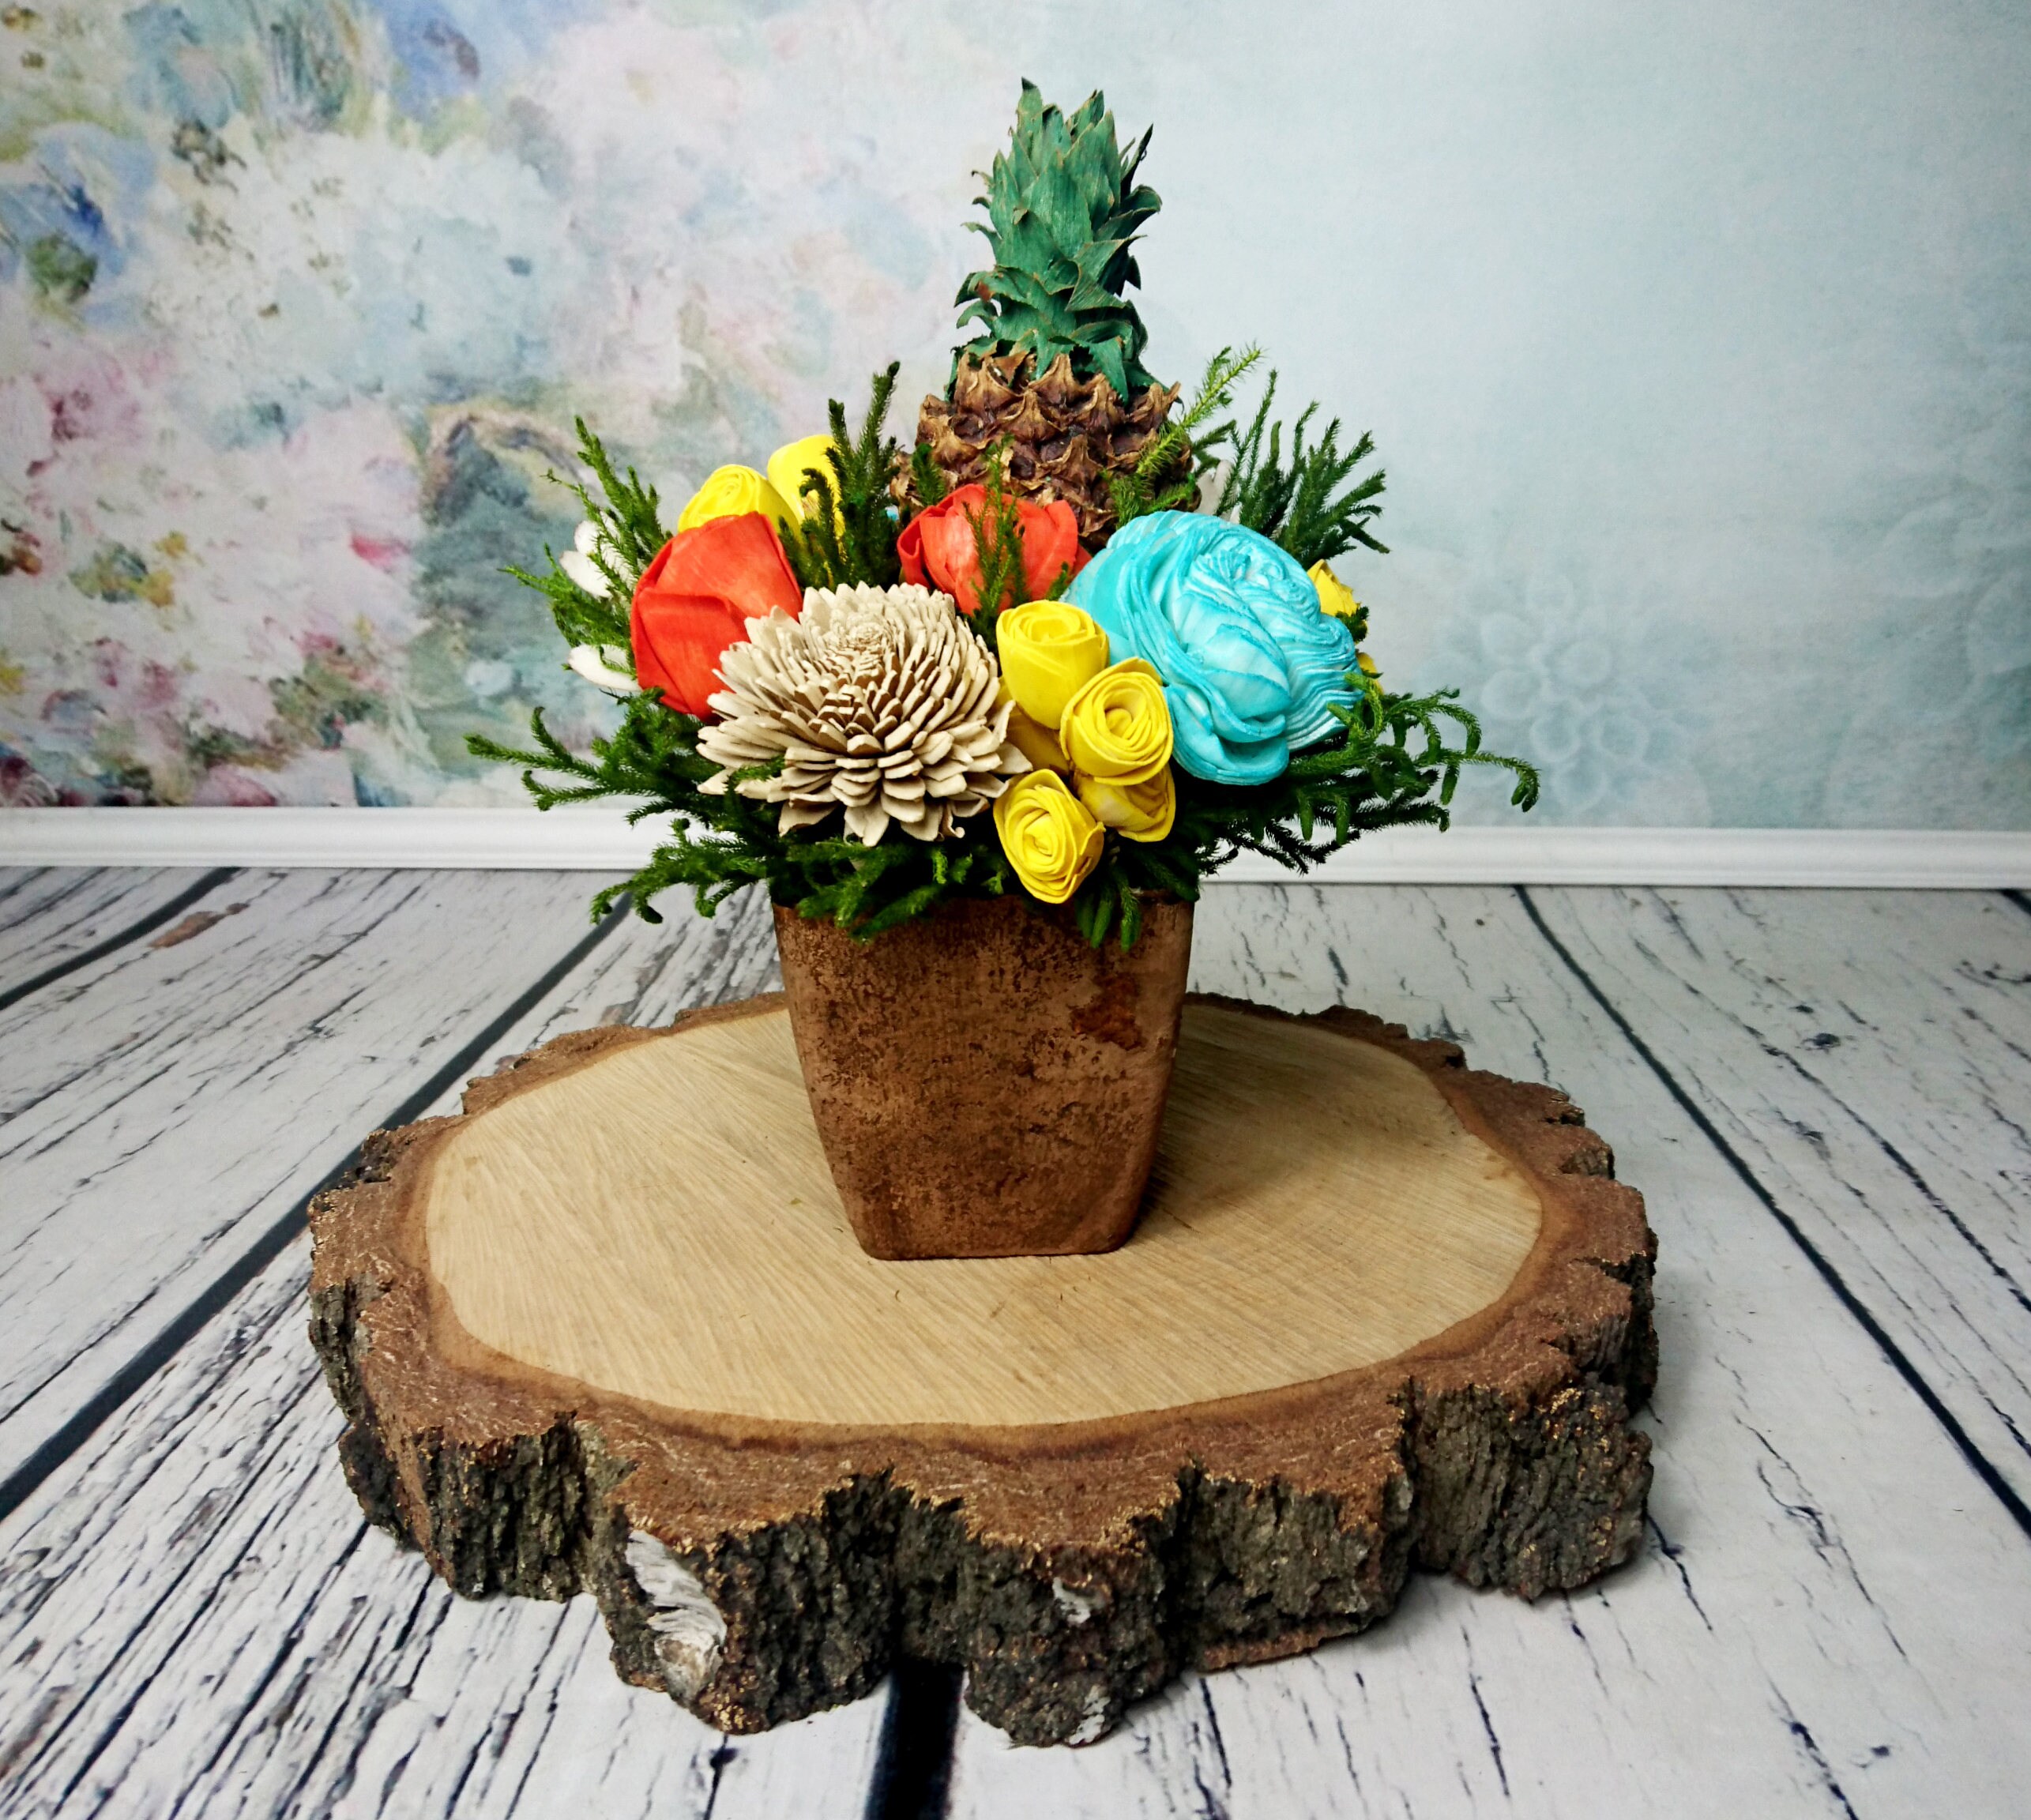 Tropical Paradise Wedding Centerpiece With Pineapple